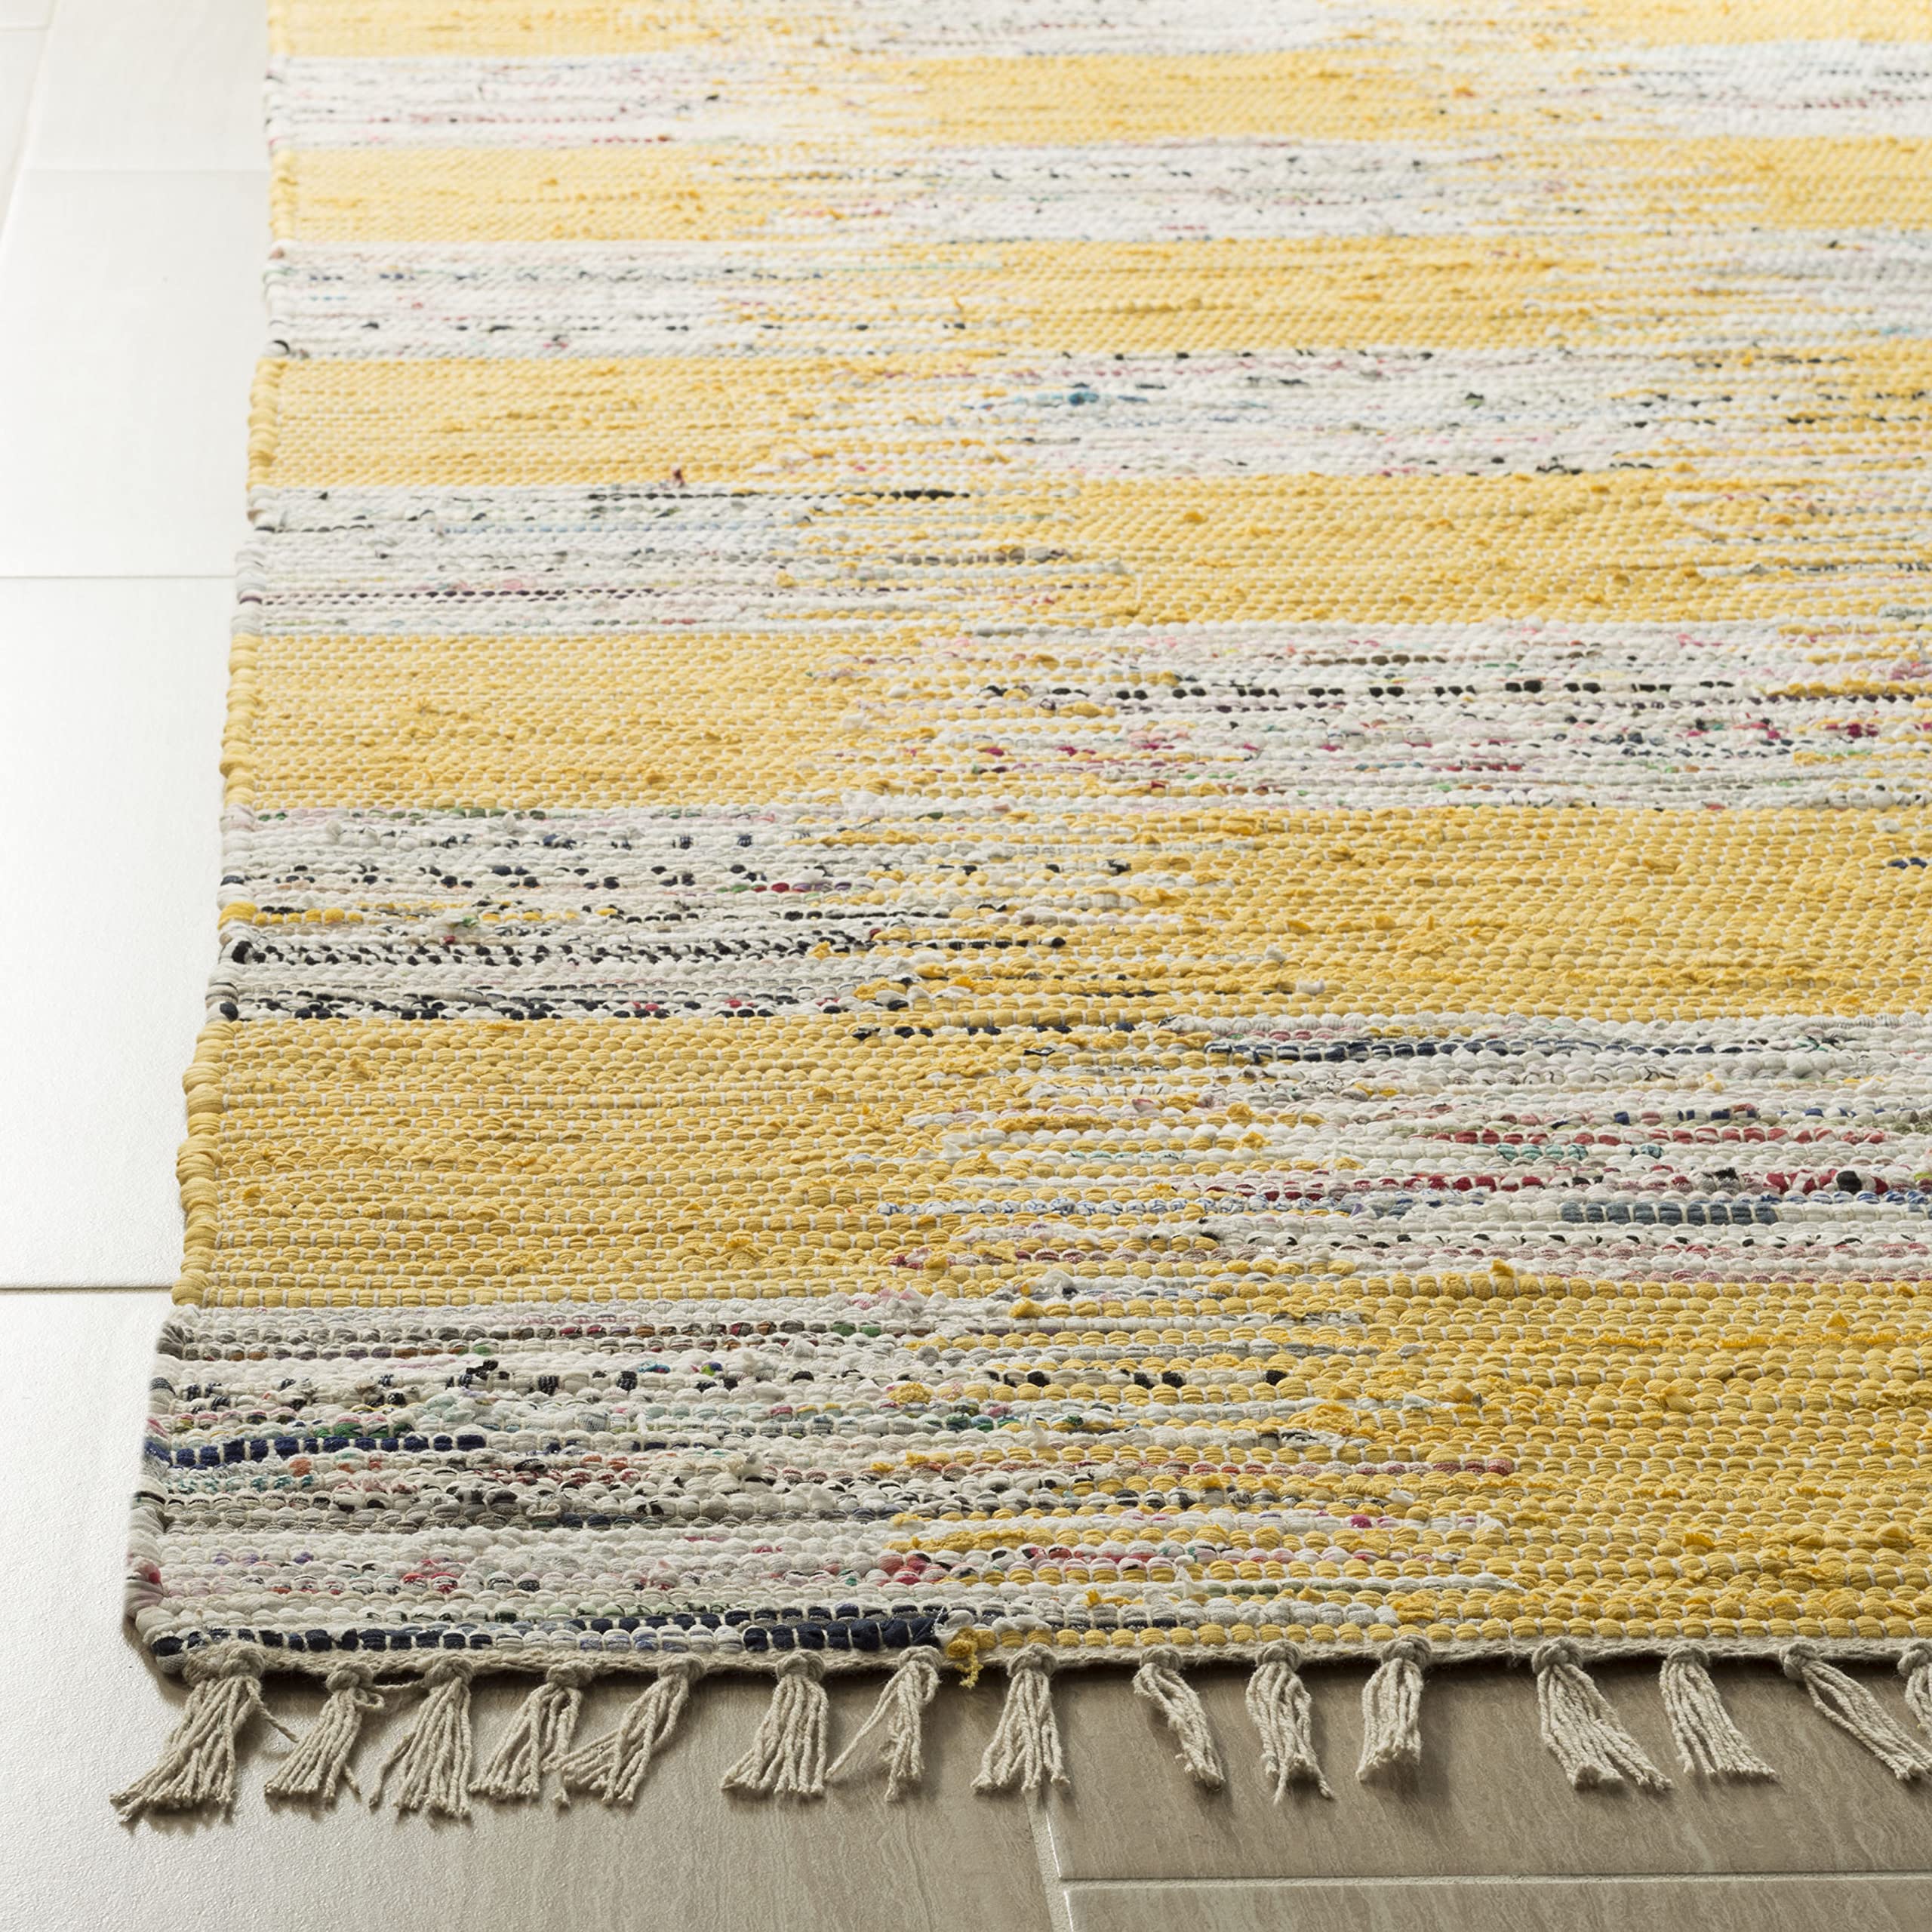 SAFAVIEH Montauk Collection Accent Rug - 2'6" x 4', Yellow & Multi, Handmade Fringe Cotton, Ideal for High Traffic Areas in Entryway, Living Room, Bedroom (MTK721A)